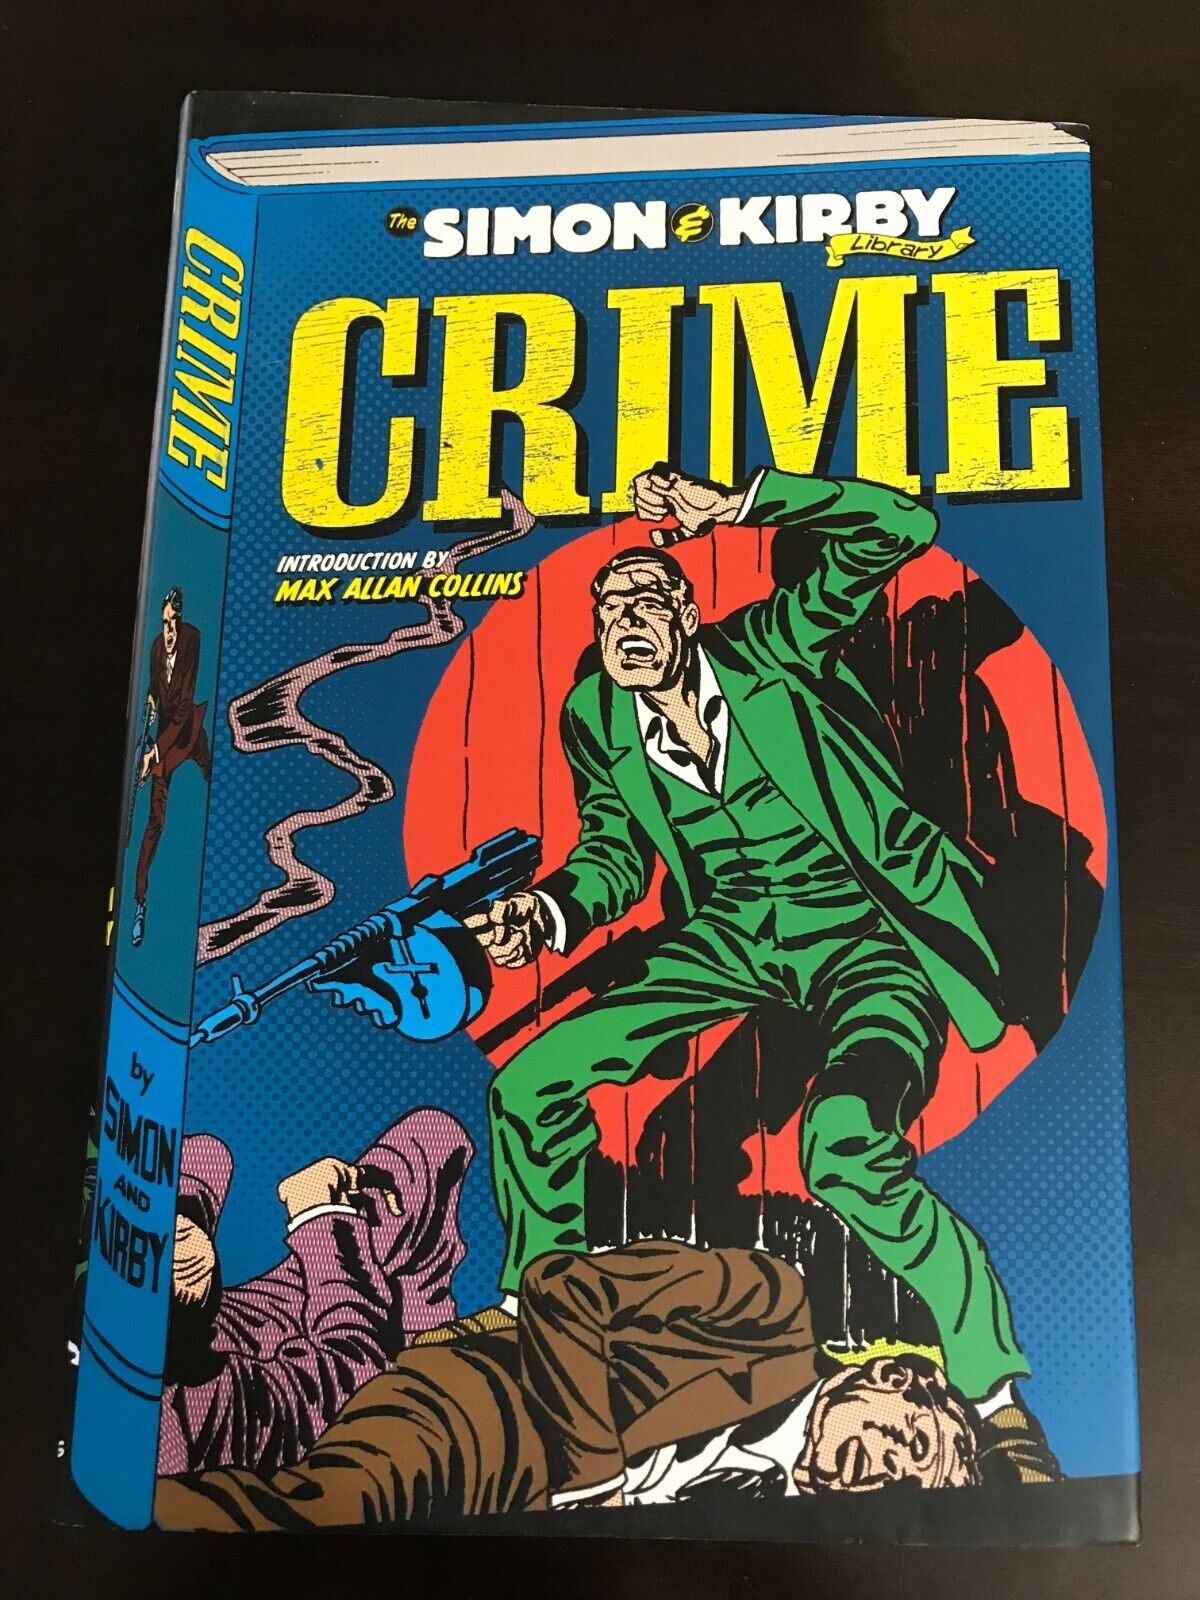 The Simon and Kirby Library Crime Hardcover (Max Allan Collins) (October 2011)